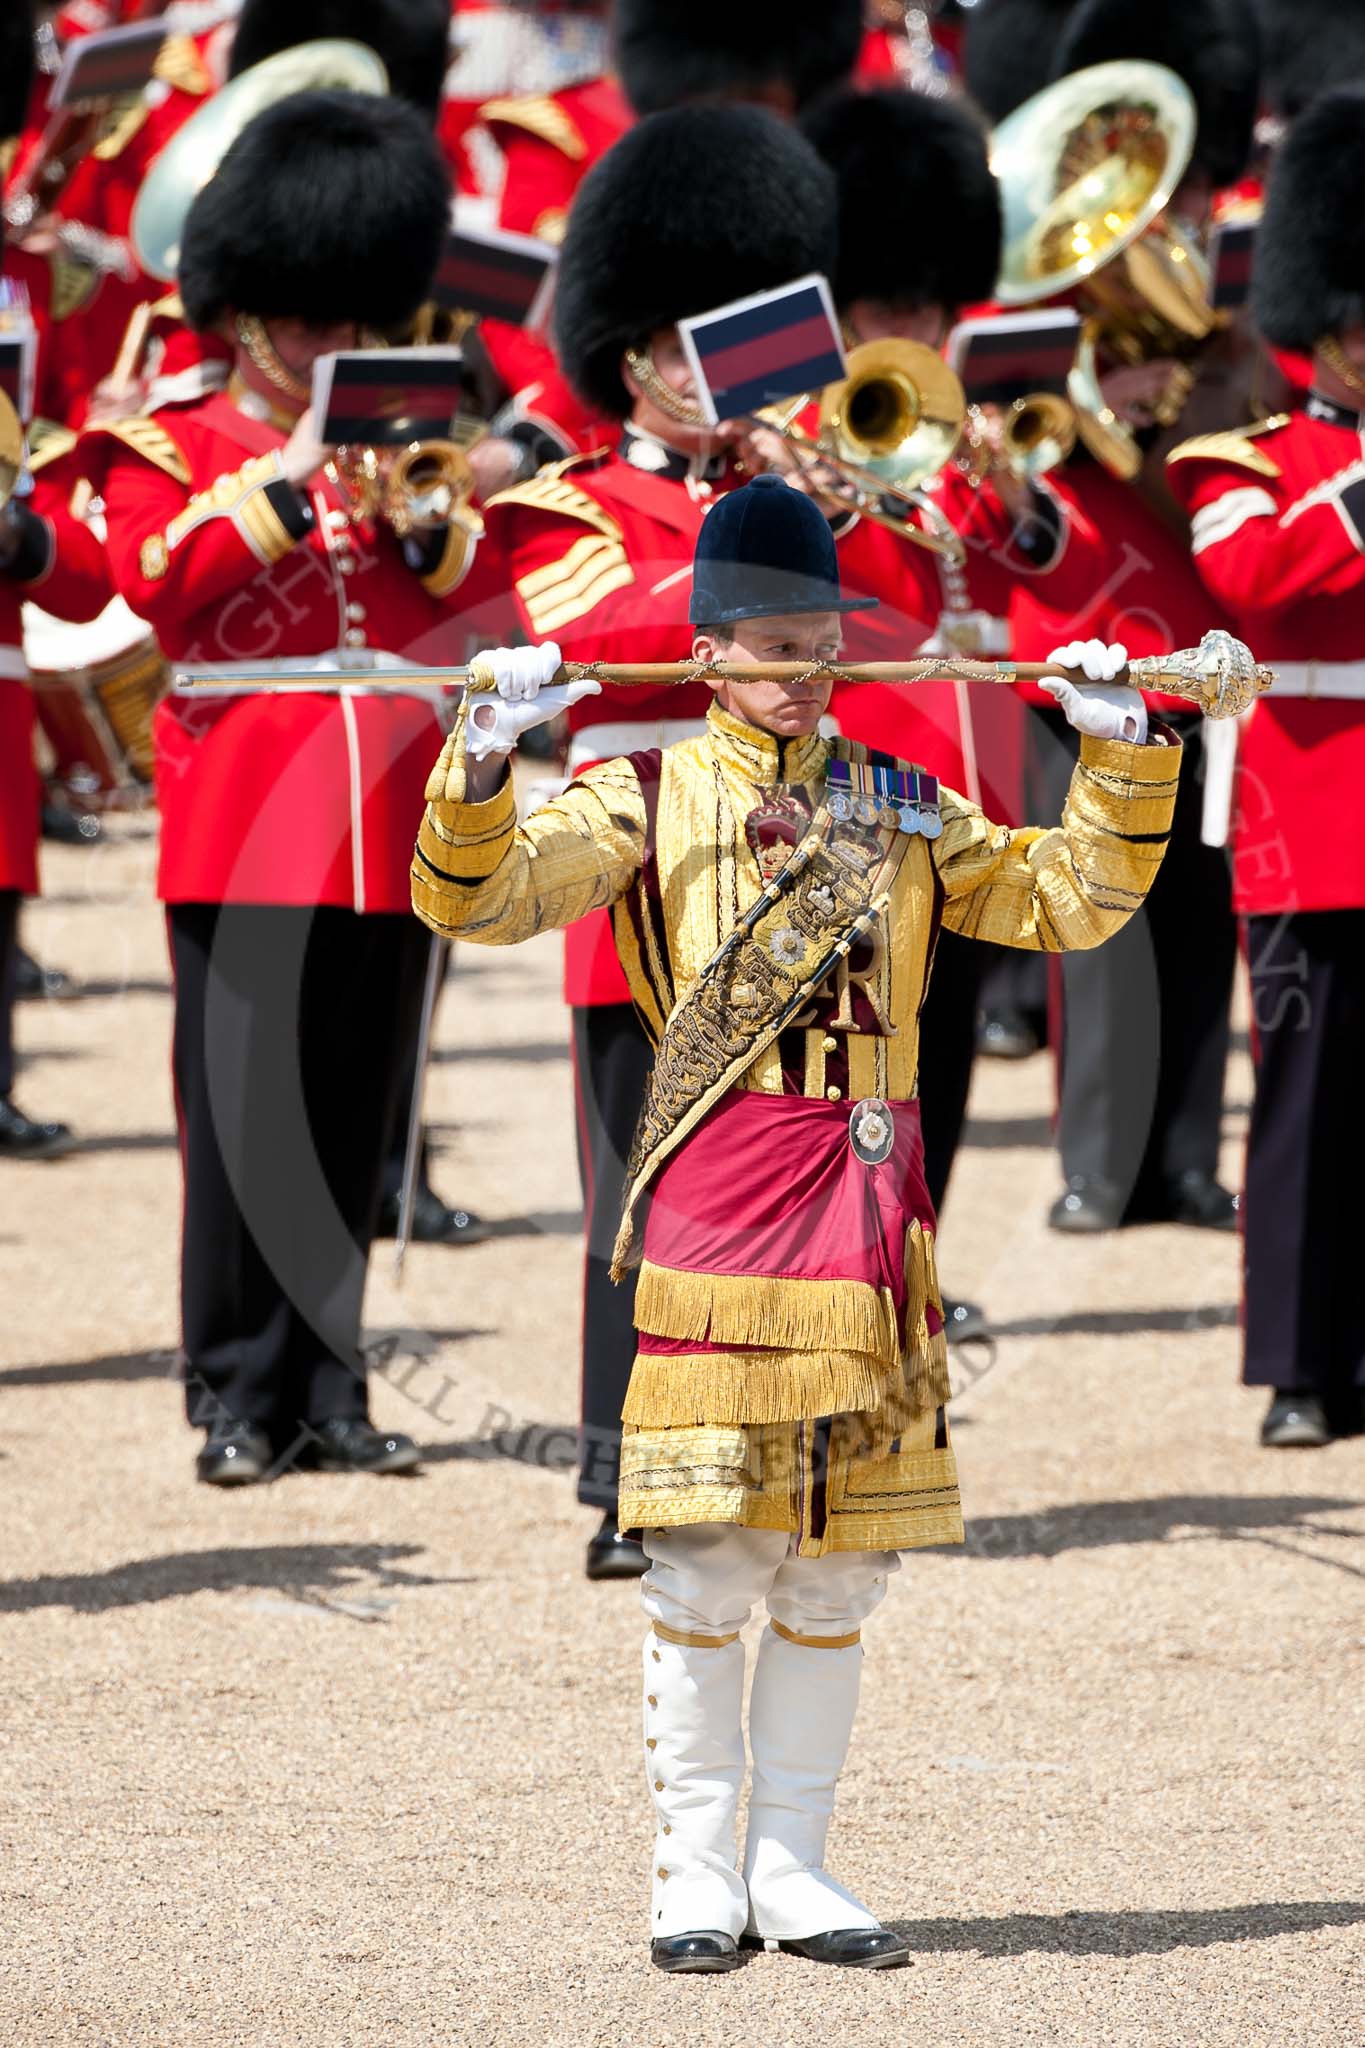 Trooping the Colour 2009: Drum Major M Godsman, Scots Guards..
Horse Guards Parade, Westminster,
London SW1,

United Kingdom,
on 13 June 2009 at 11:39, image #212